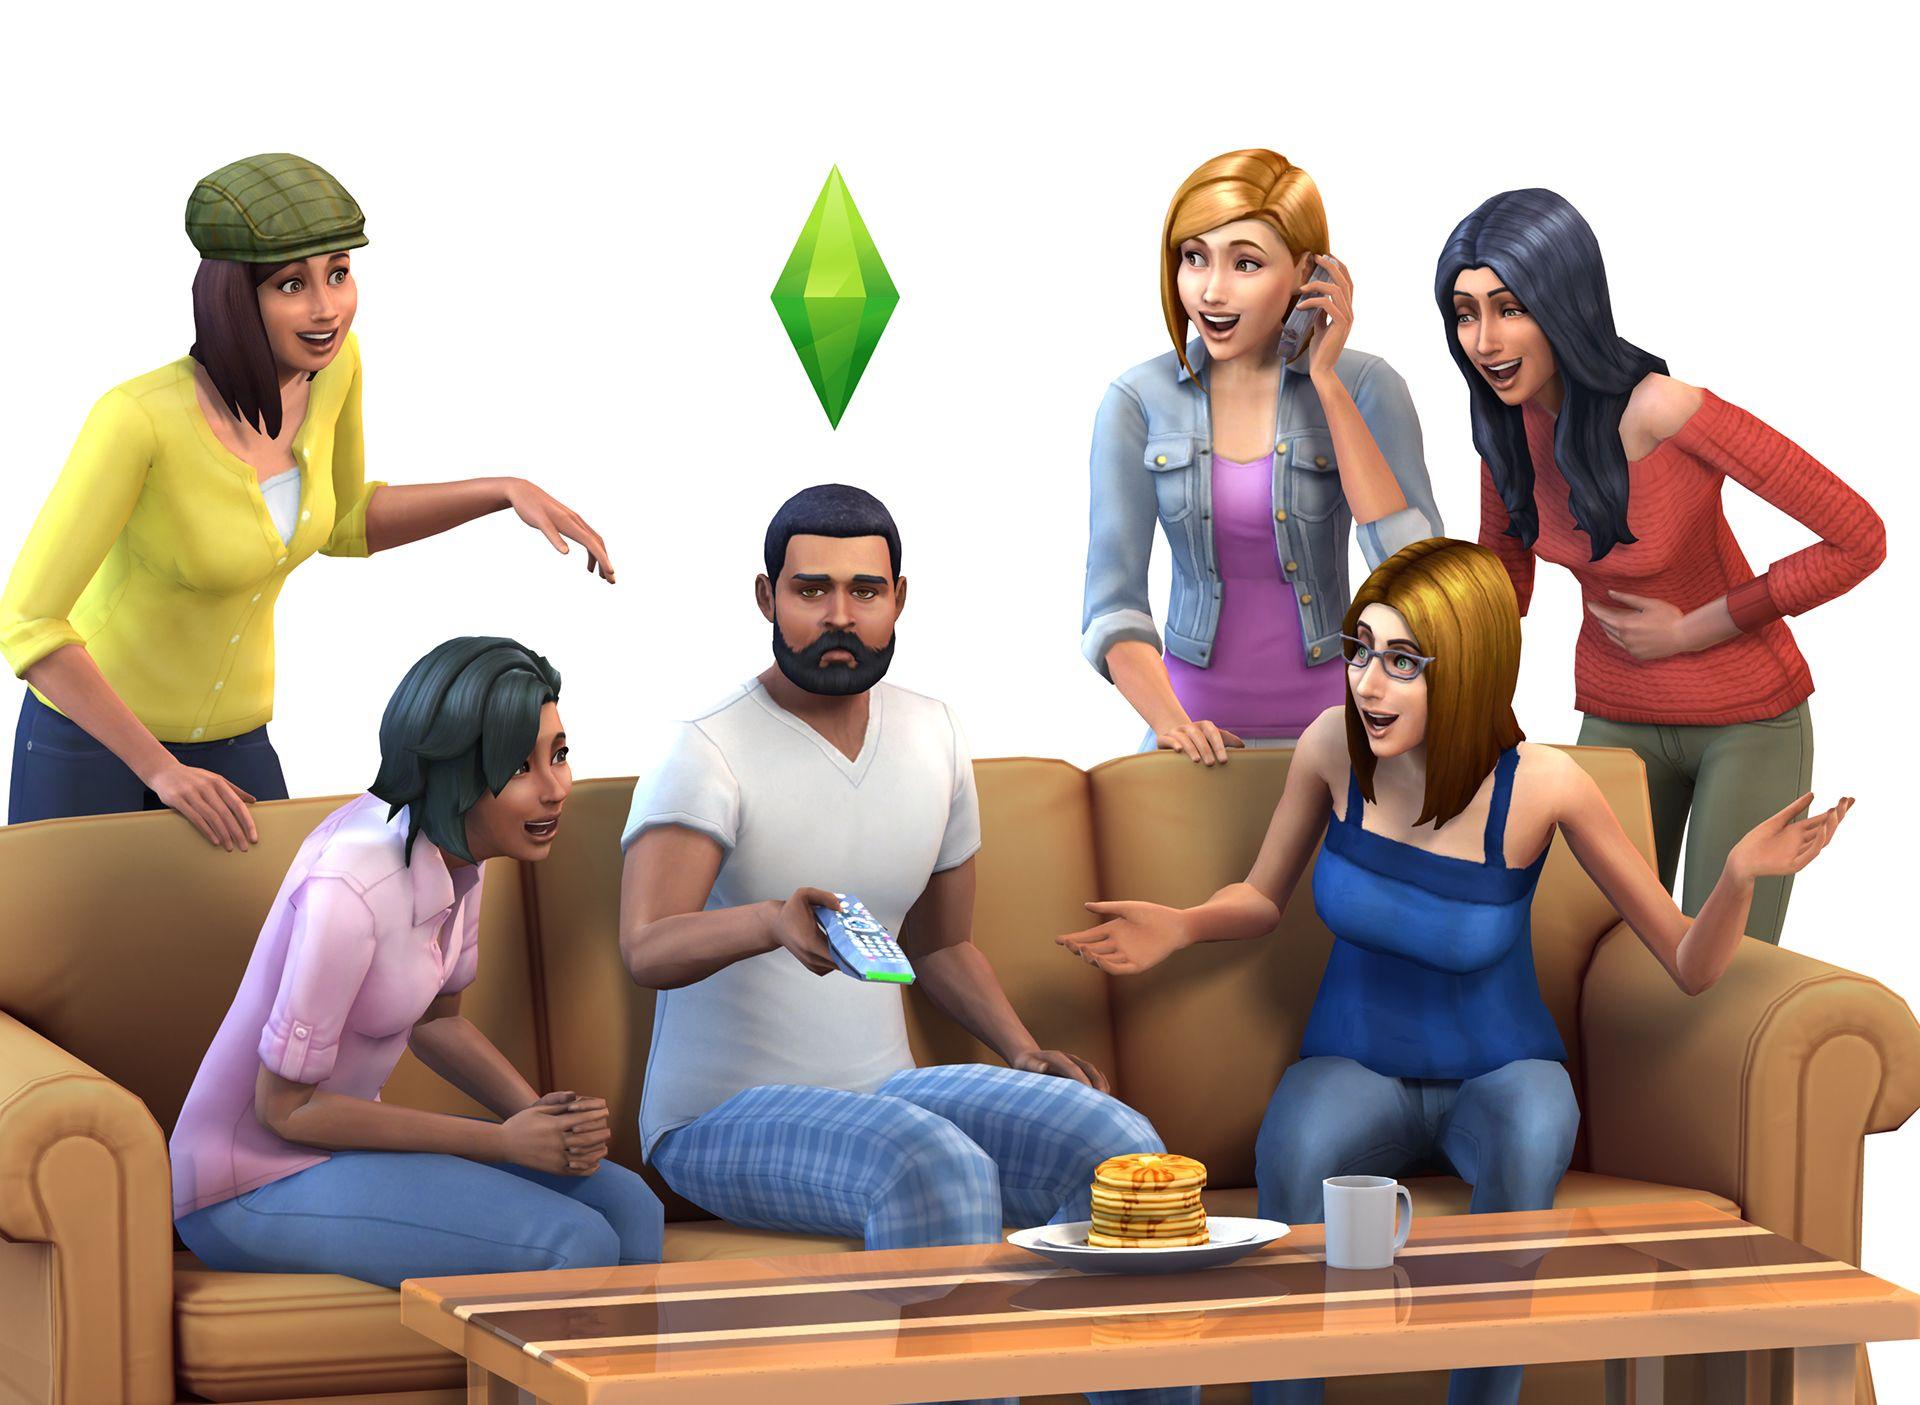 1920x1405px The Sims 4 HD wallpaper 82